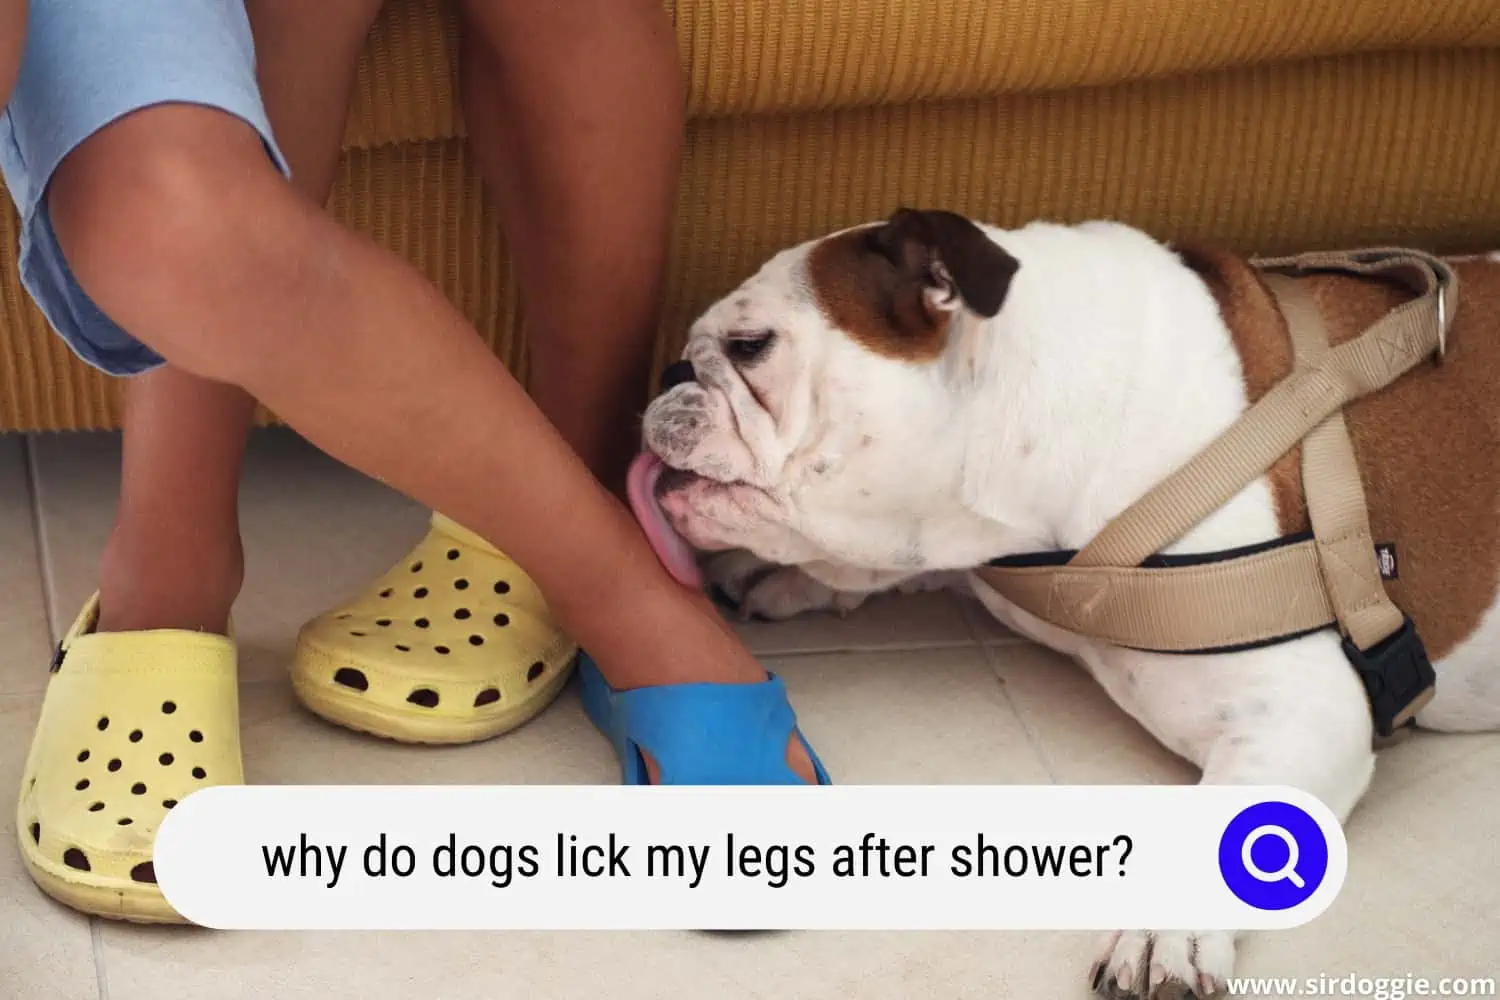 why dogs lick legs after shower